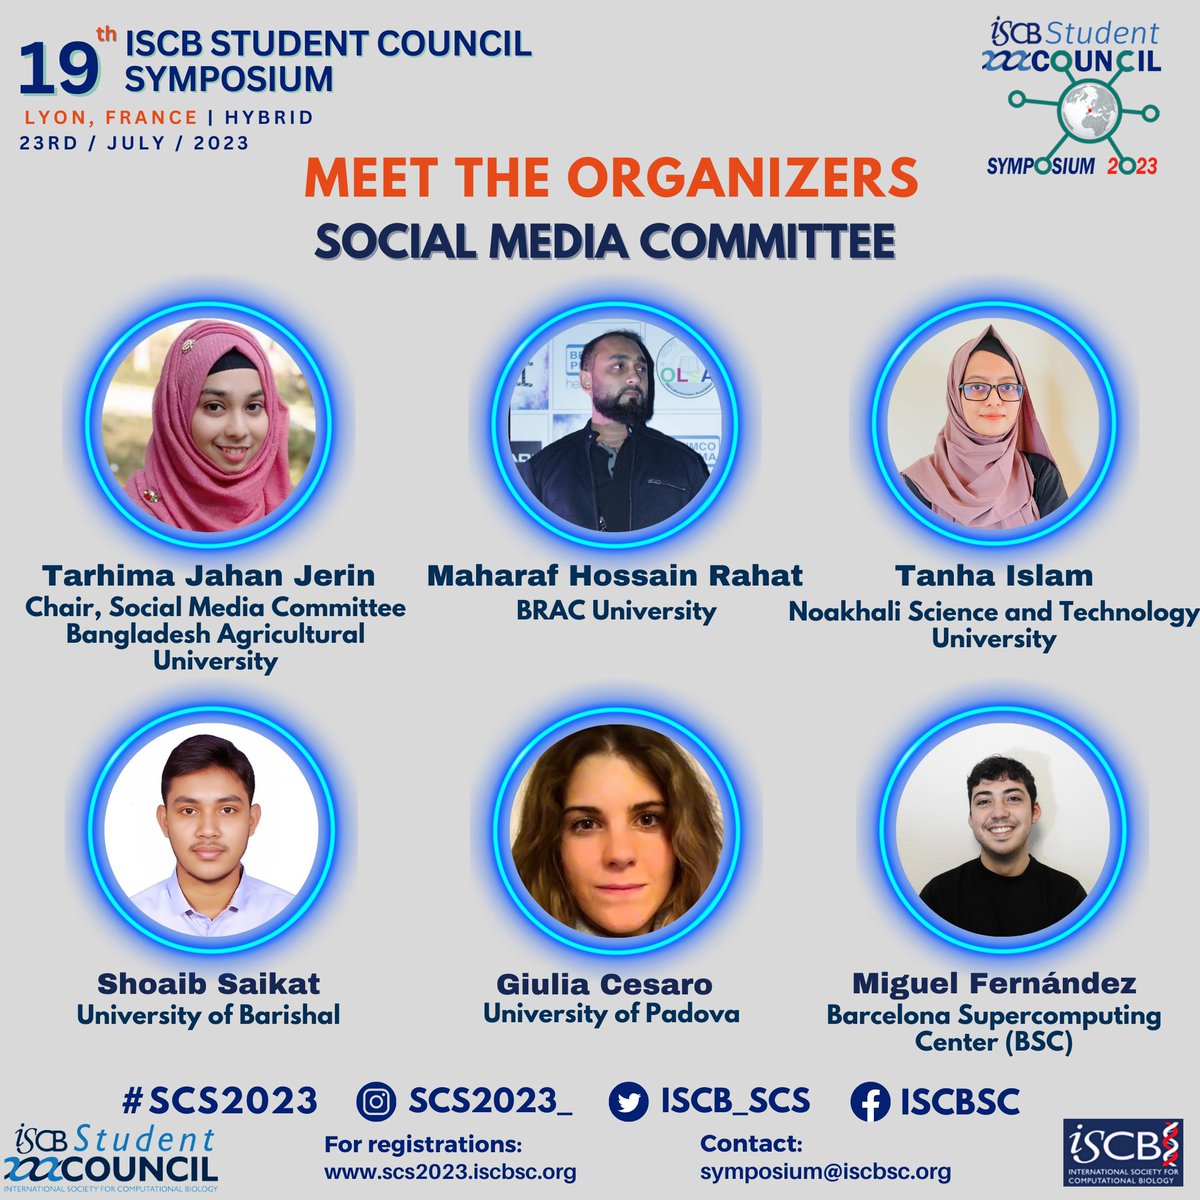 Let’s meet esteemed committee members who are shaping the upcoming #SCS2023

Without their tireless efforts, the symposium would not have been possible

🔥Stay tuned for the updates SCS2023

🔗Register here: scs2023.iscbsc.org/Registration

#Bioinformatics #Conference #Committee #ISCB